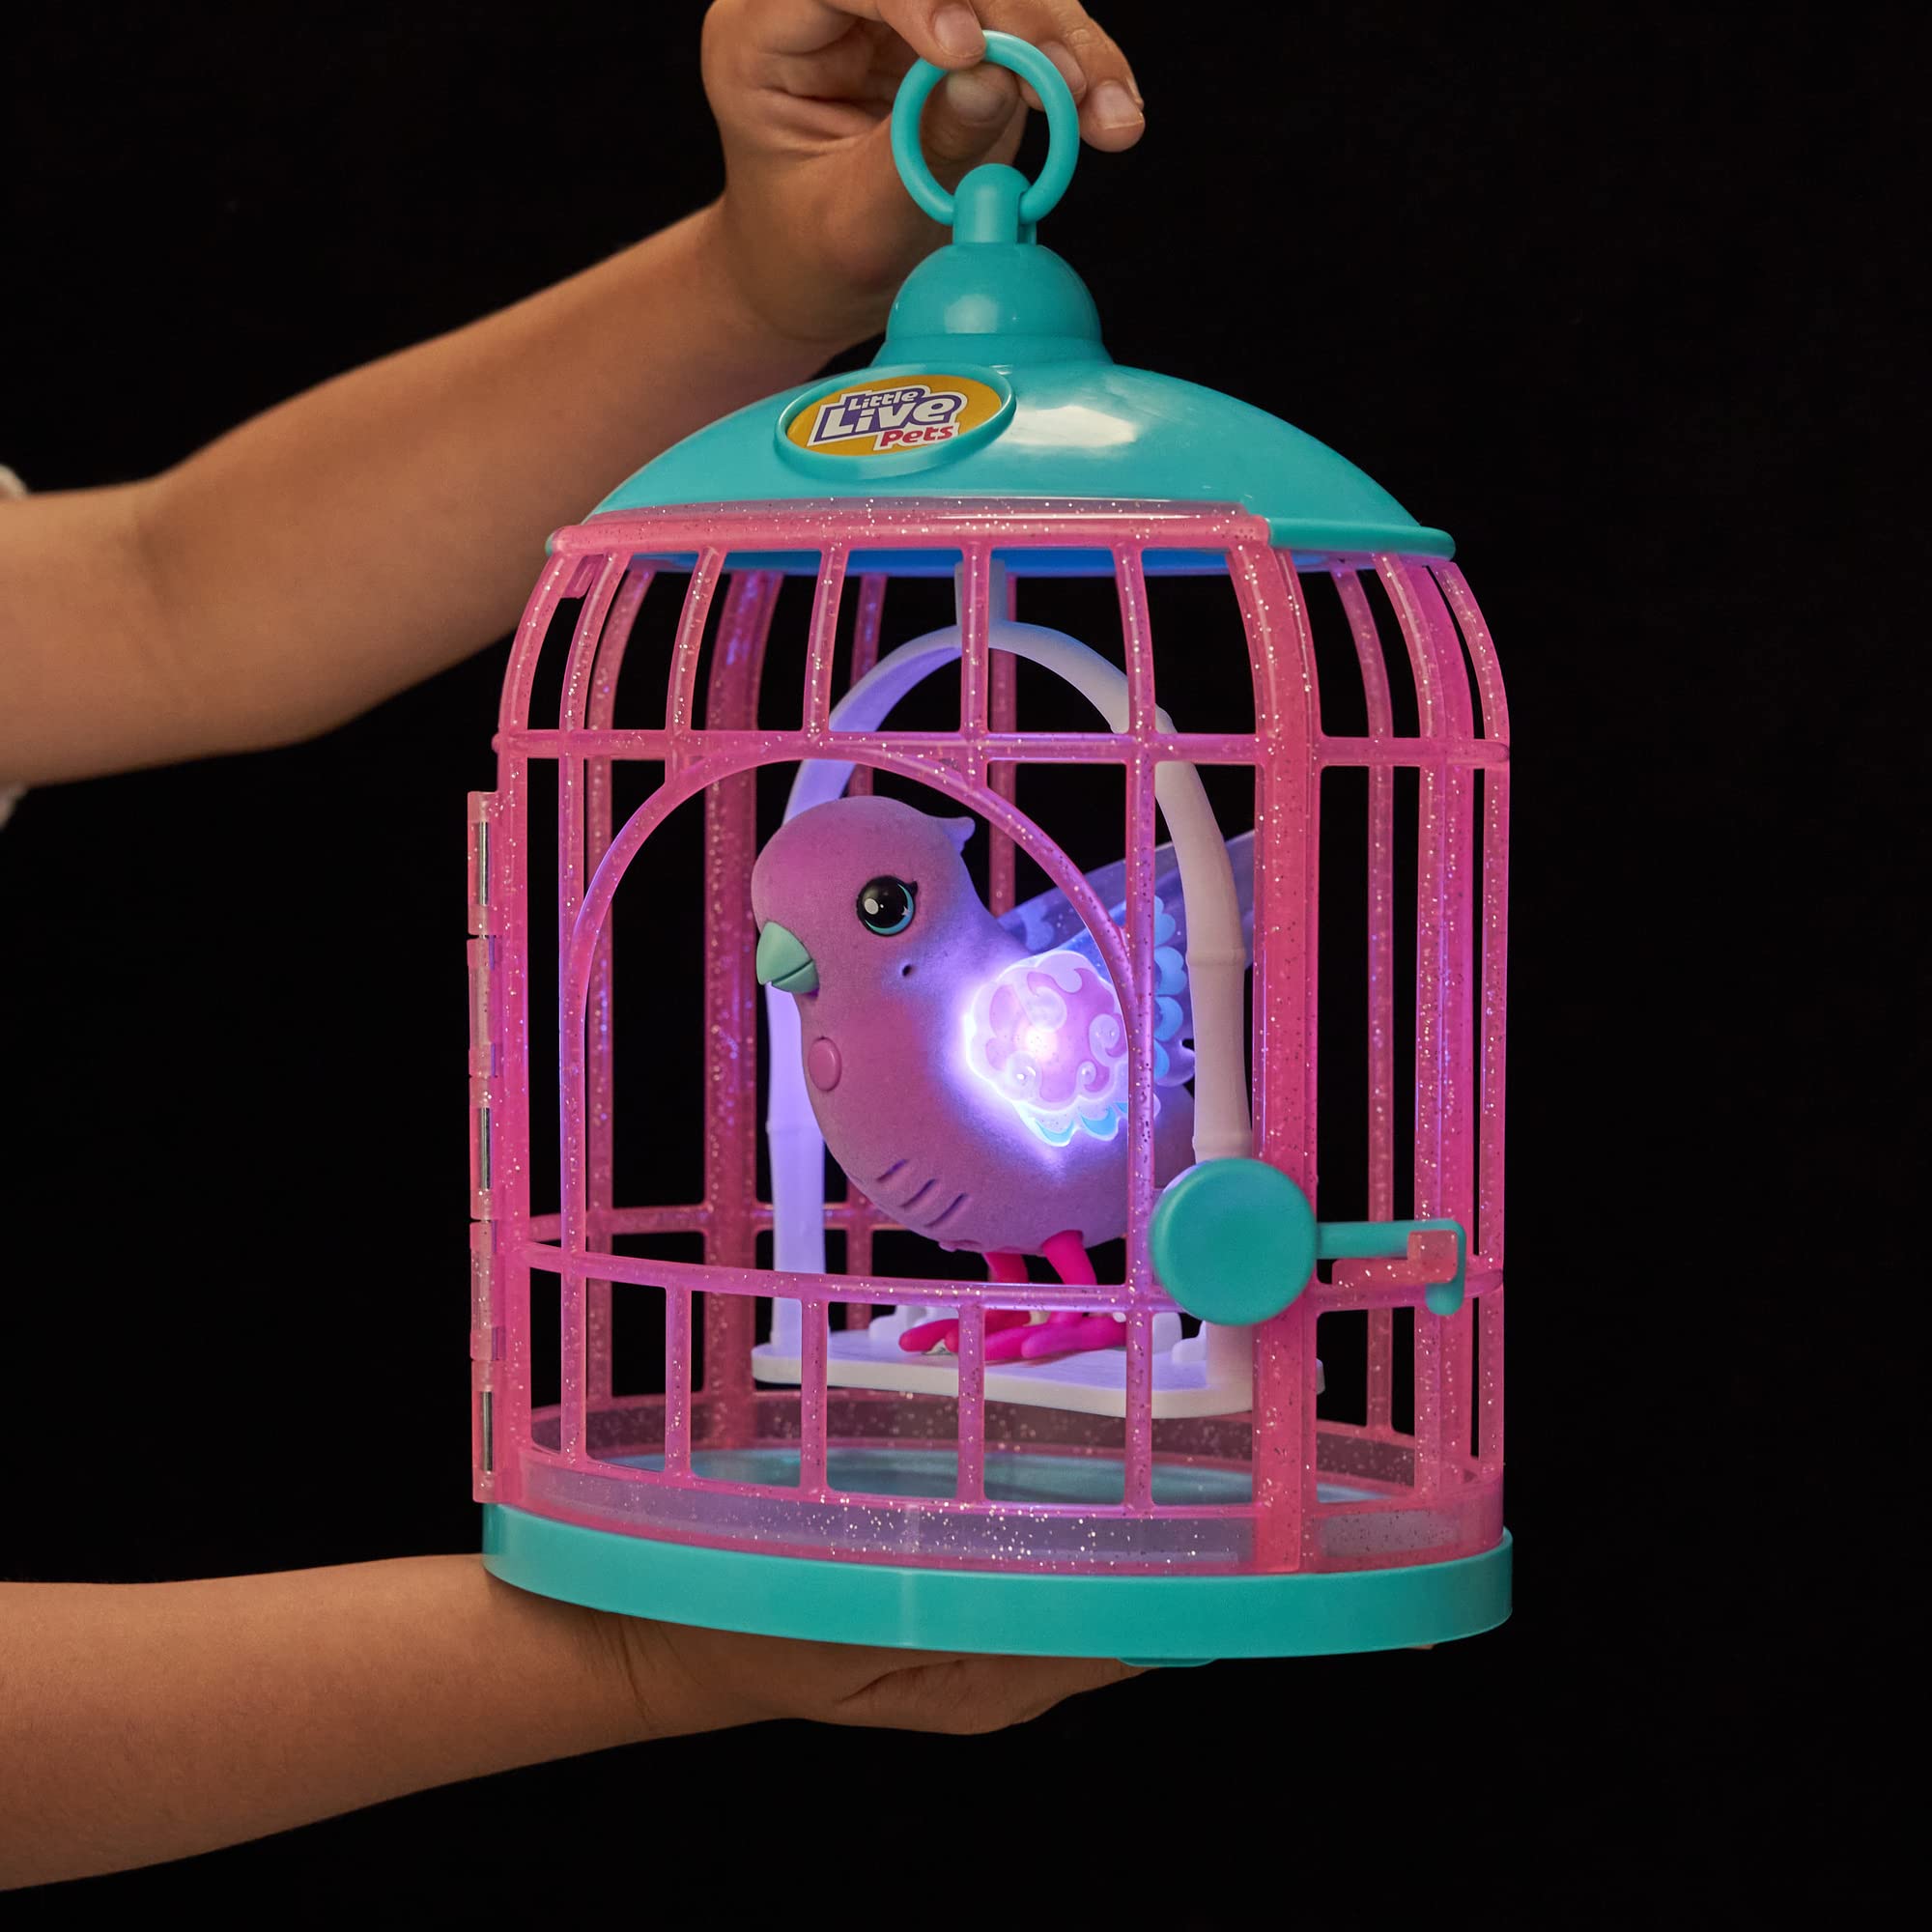 Little Live Pets - Lil' Bird & Bird Cage: Polly Pearl, New Light Up Wings with 20 + Sounds, and Reacts to Touch